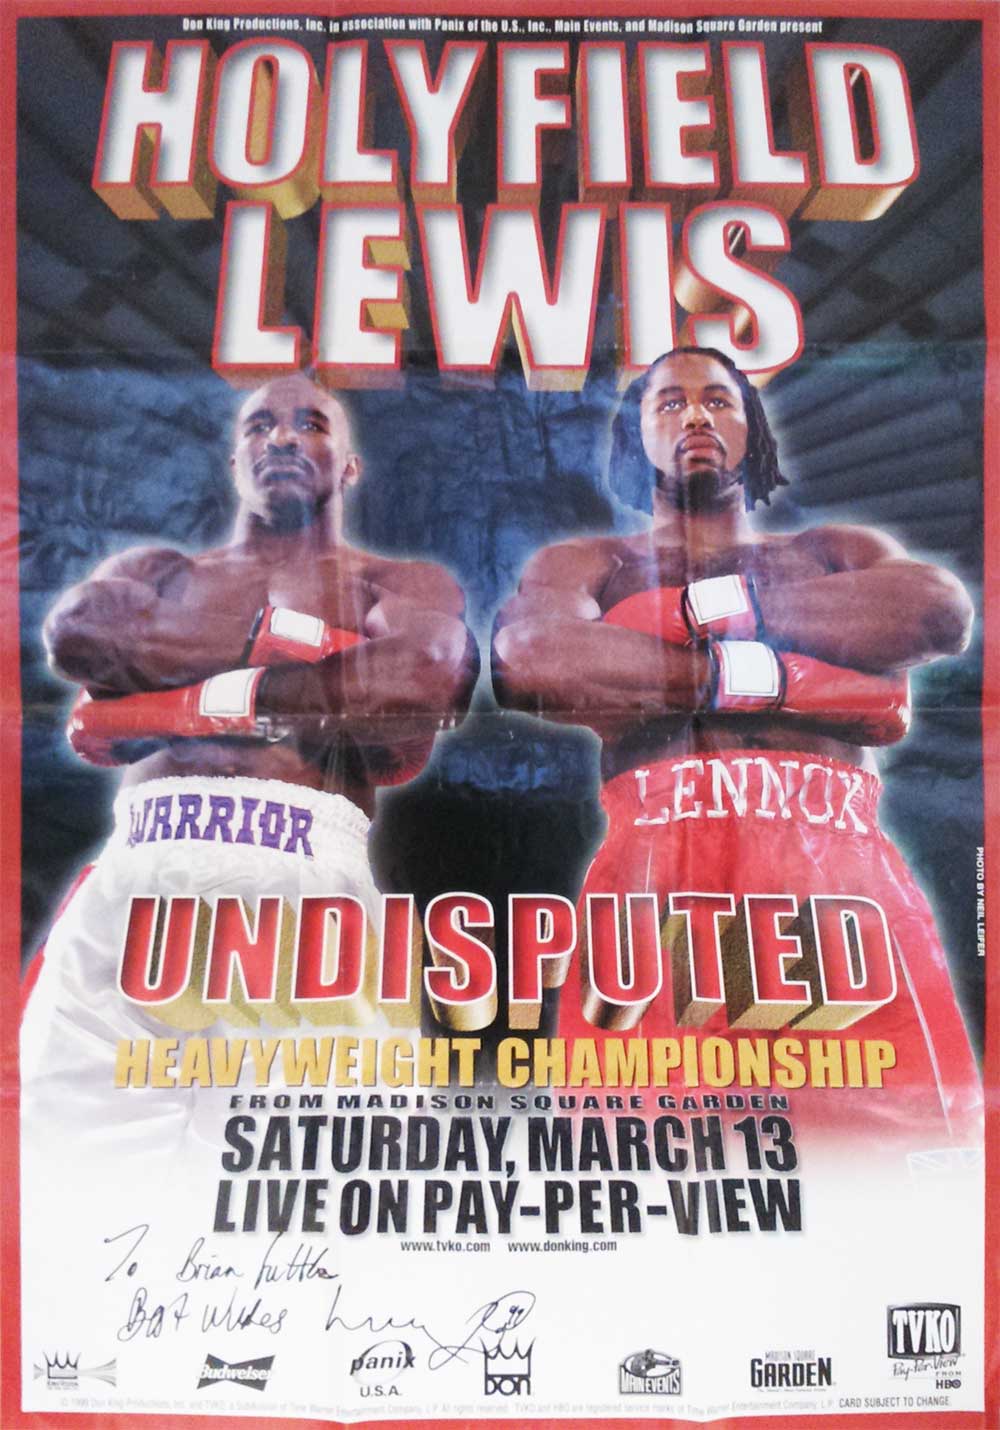 Lennox Lewis autographed poster. Large 70cm x 100cm used Boxing poster for the undisputed